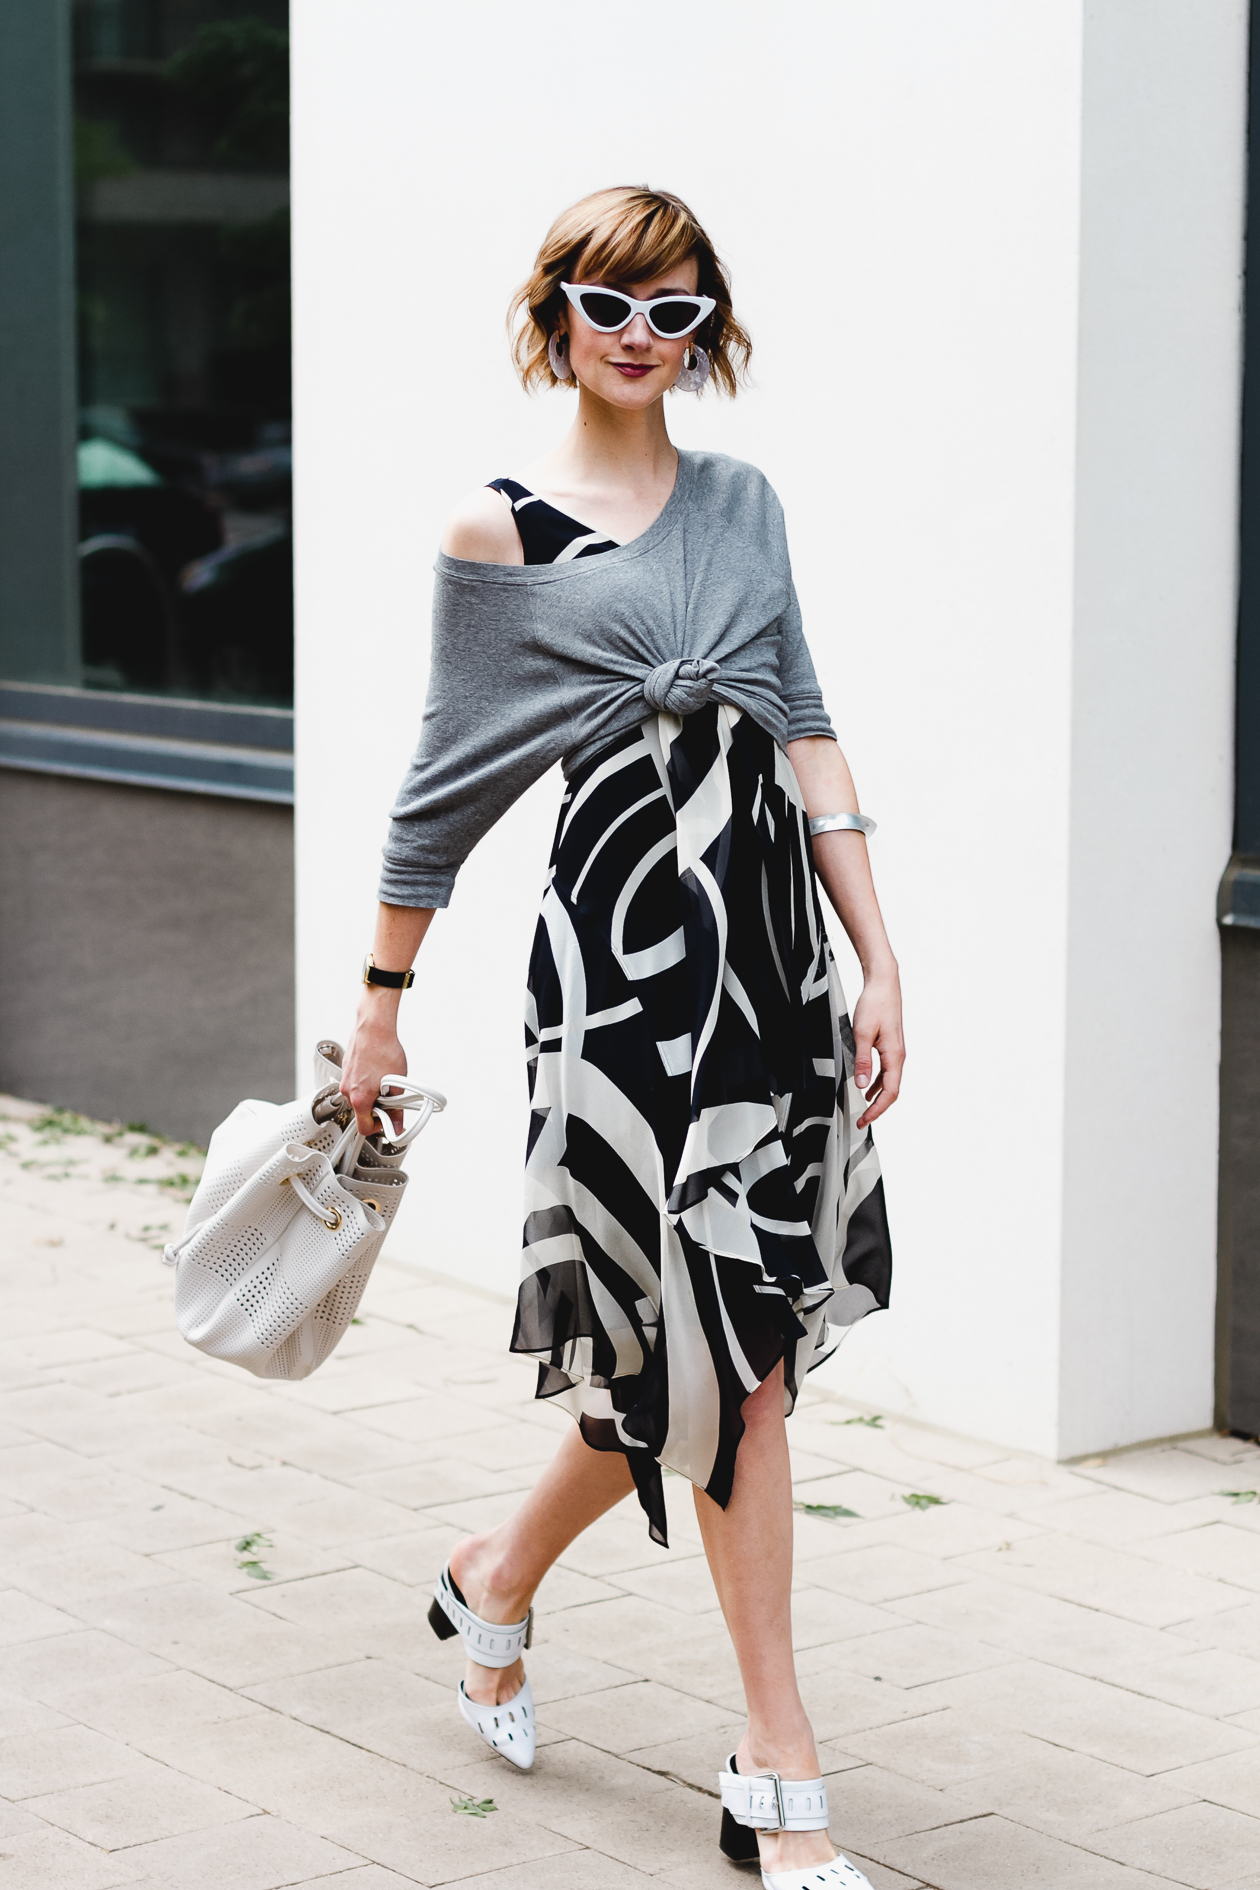 knotted sweatshirt over dress